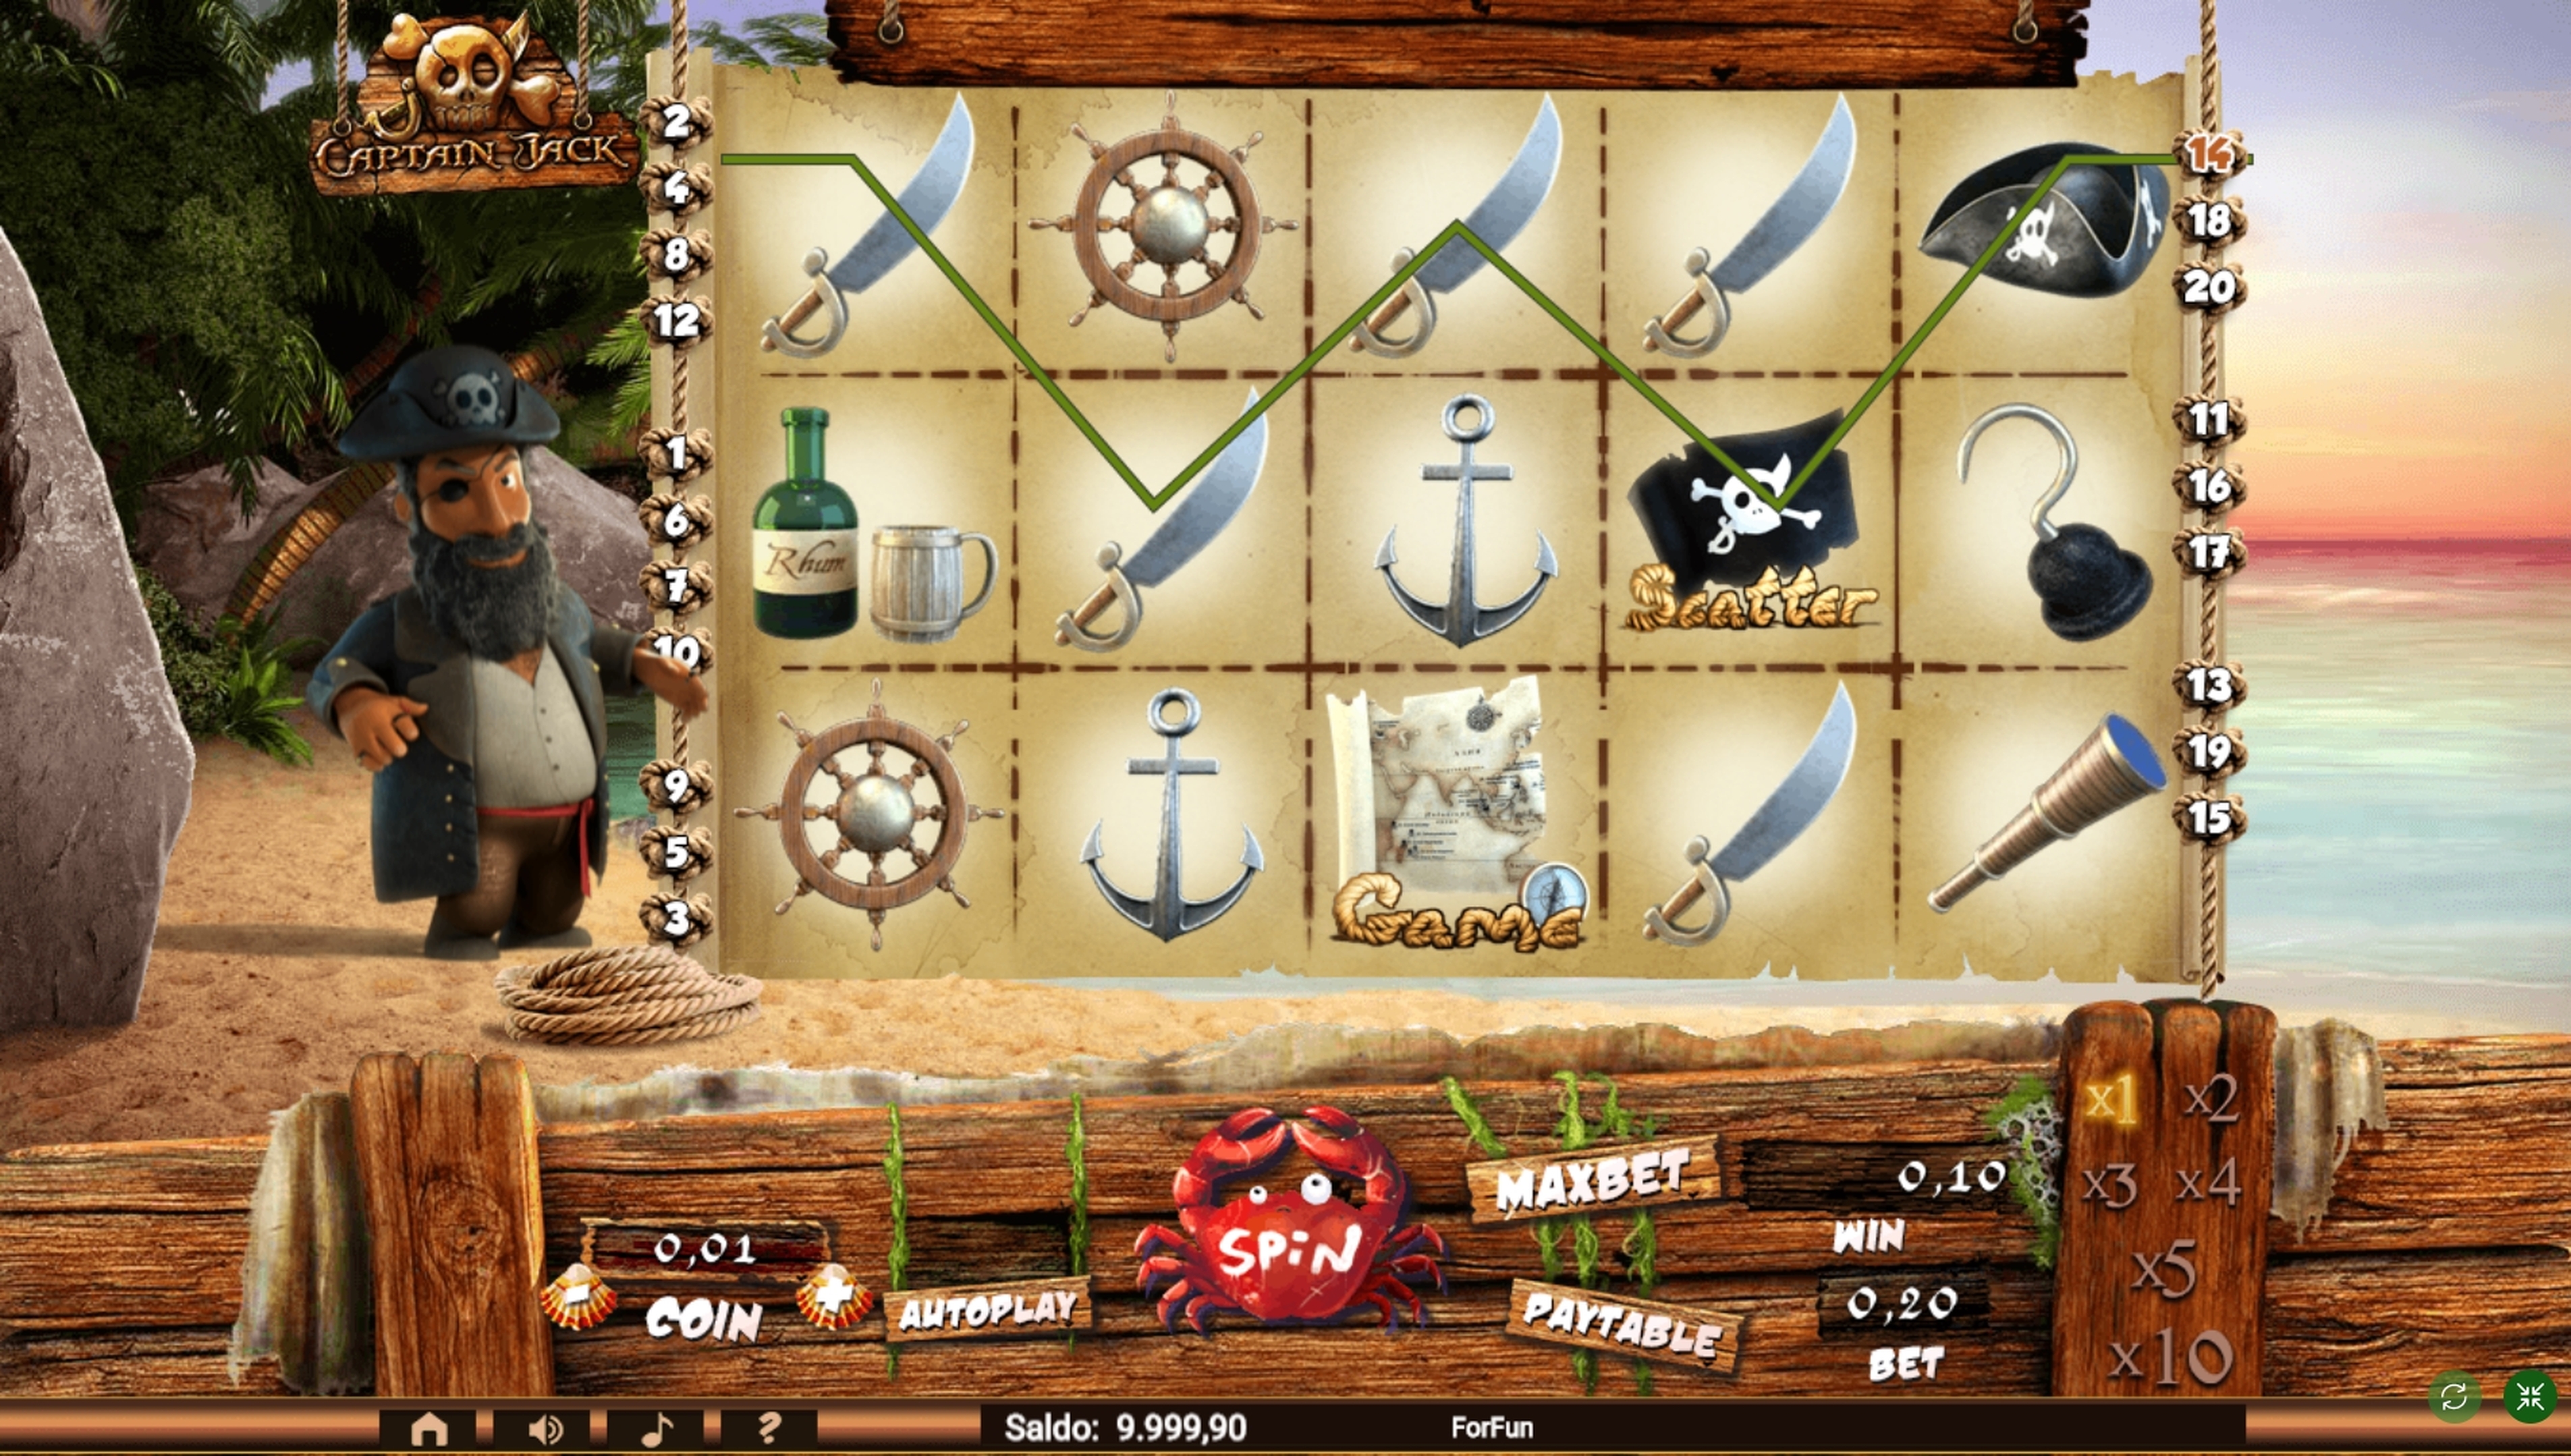 Win Money in Captain jack Free Slot Game by Tuko Productions